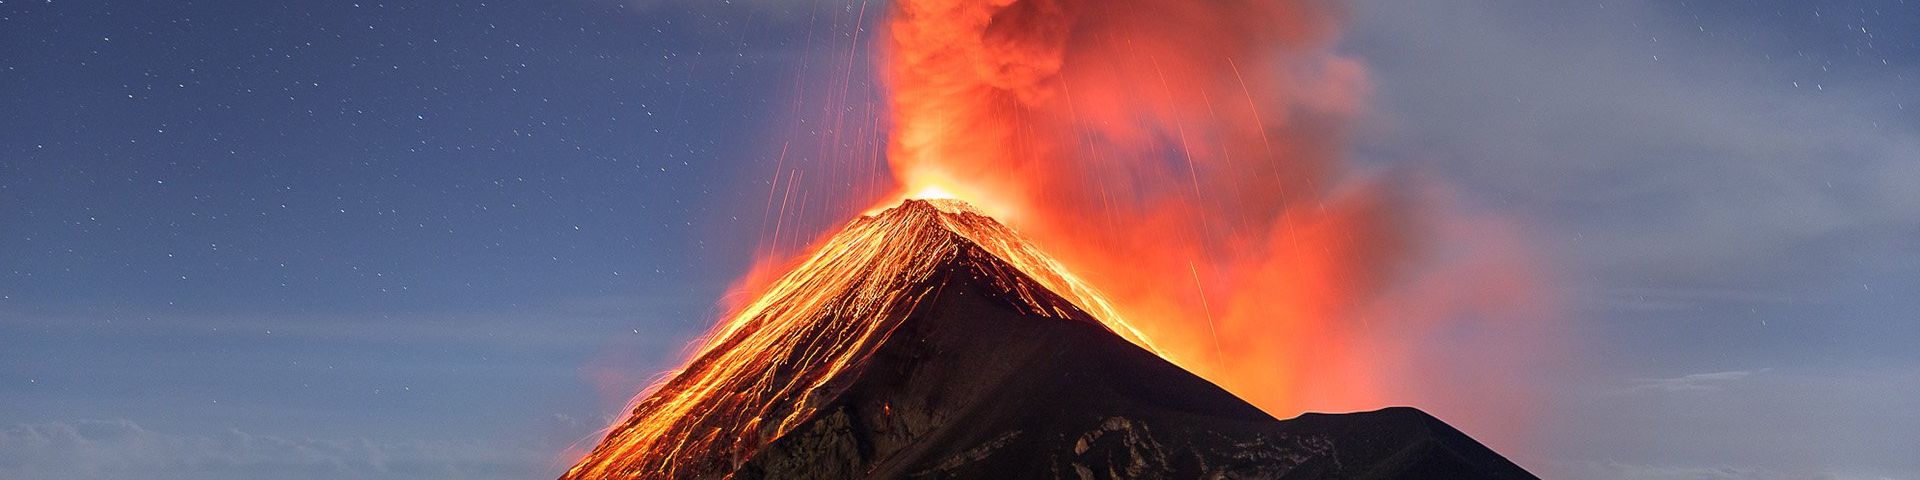 Volcano Fuego spits ash and red-hot lava into the sky.